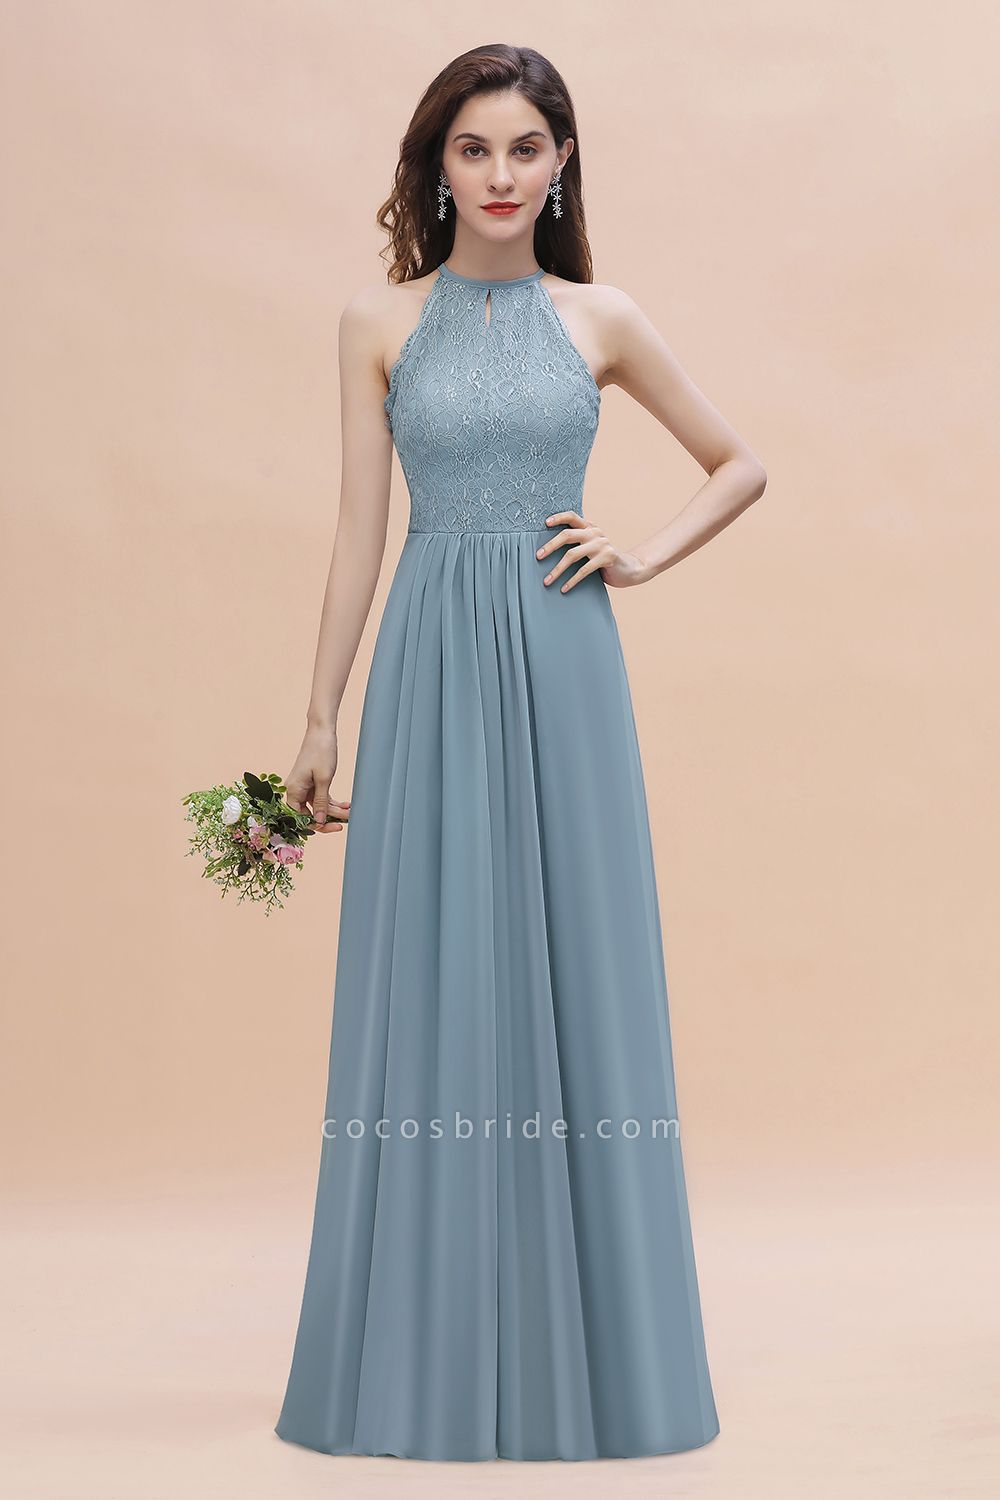 Halter Appliques Lace A-Line Chiffon Floor-length Bridesmaid Dress With Pockets